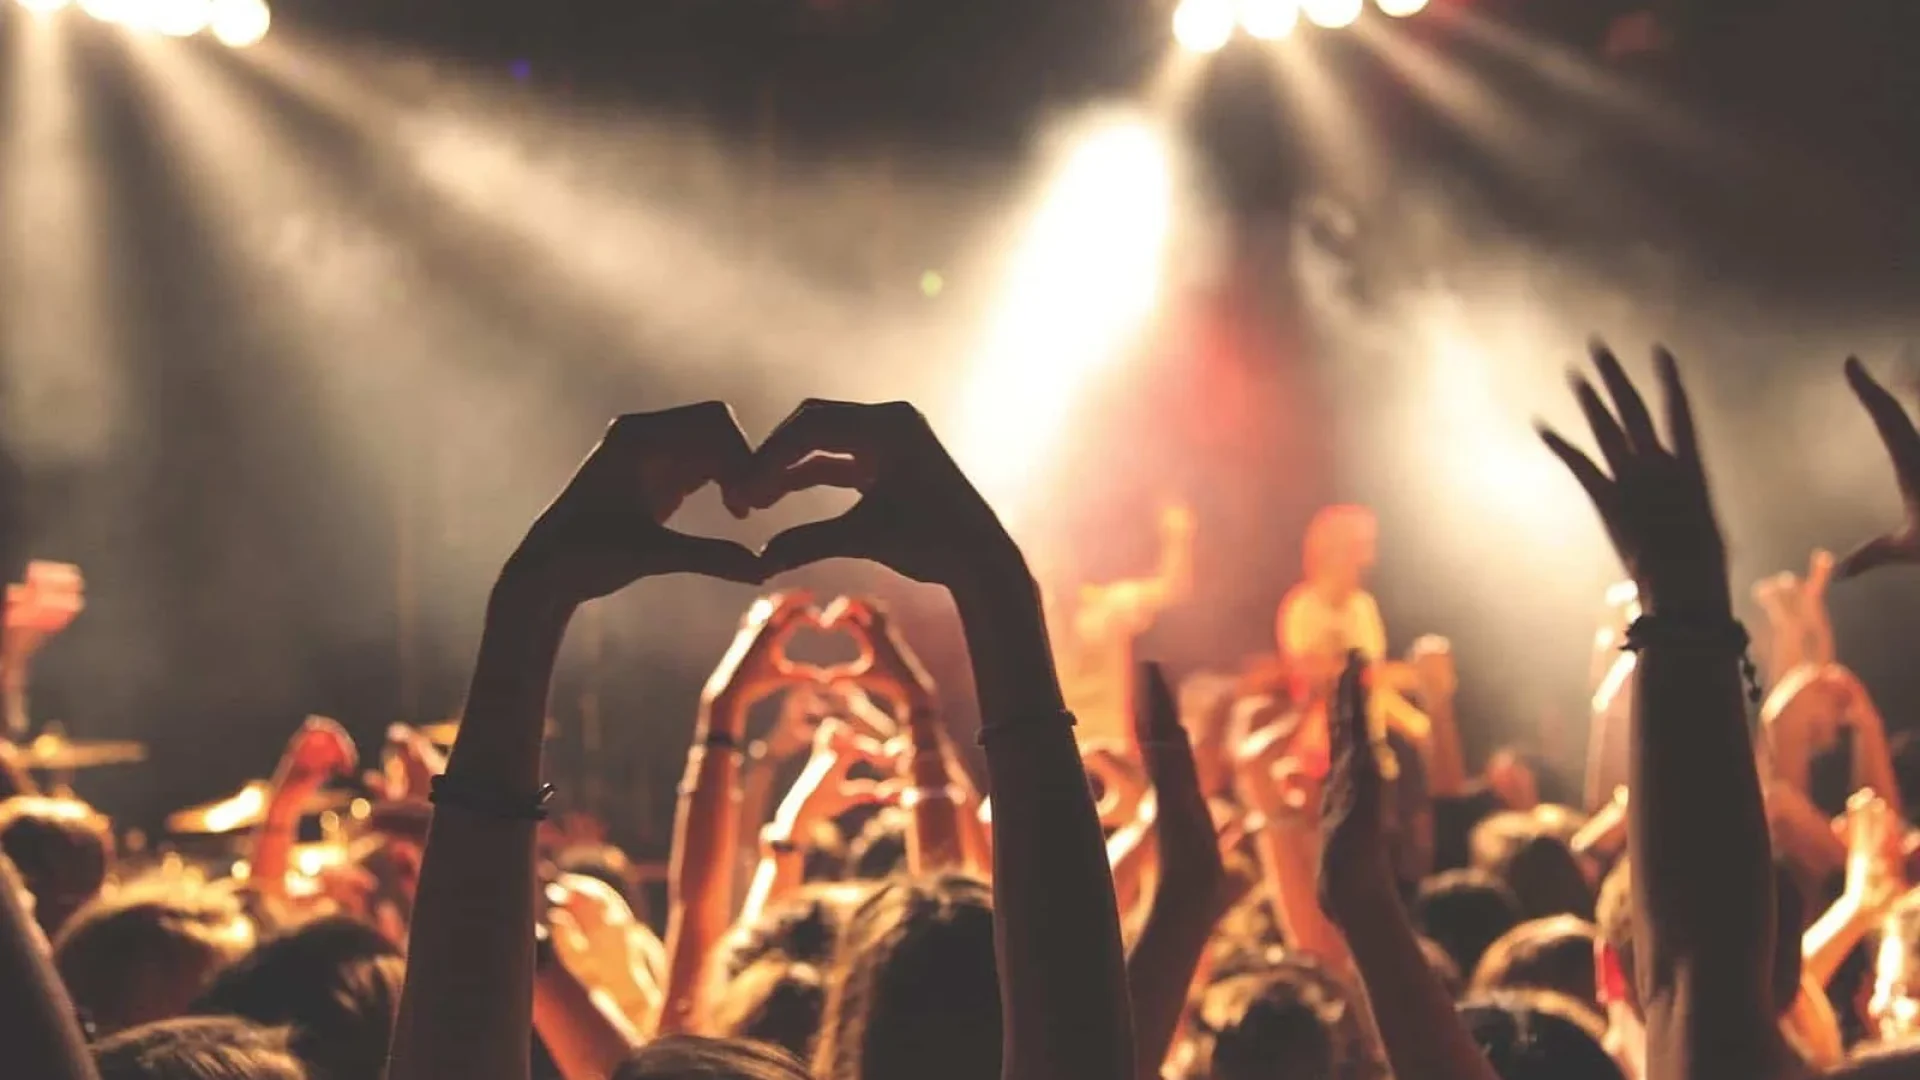 Photo showing people attending a show and forming a heart with their hands